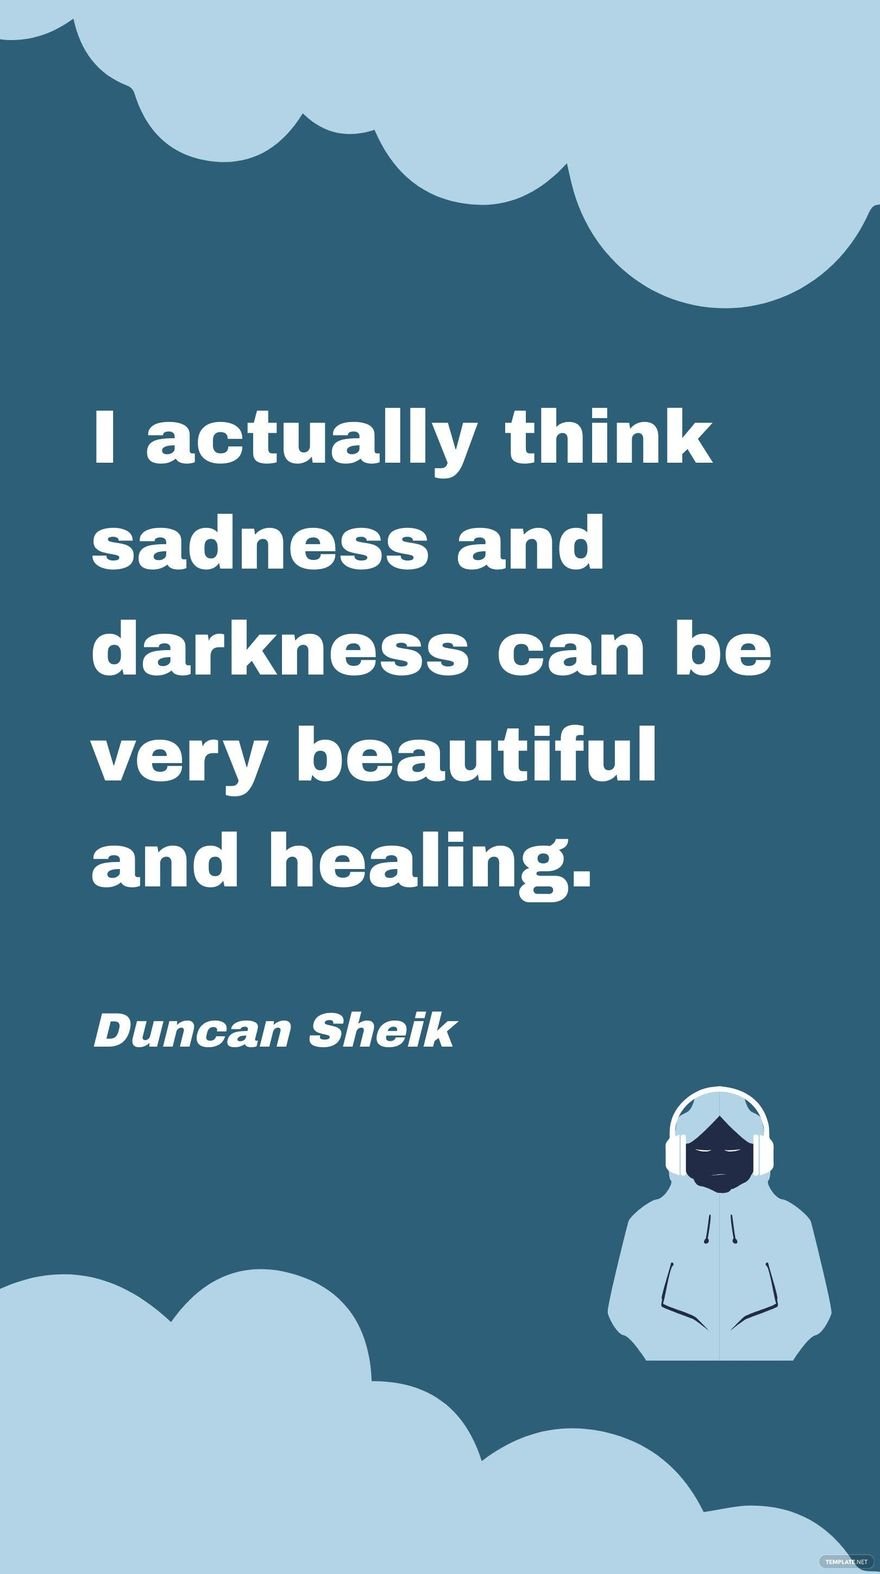 Free Duncan Sheik - I actually think sadness and darkness can be very beautiful and healing. in JPG